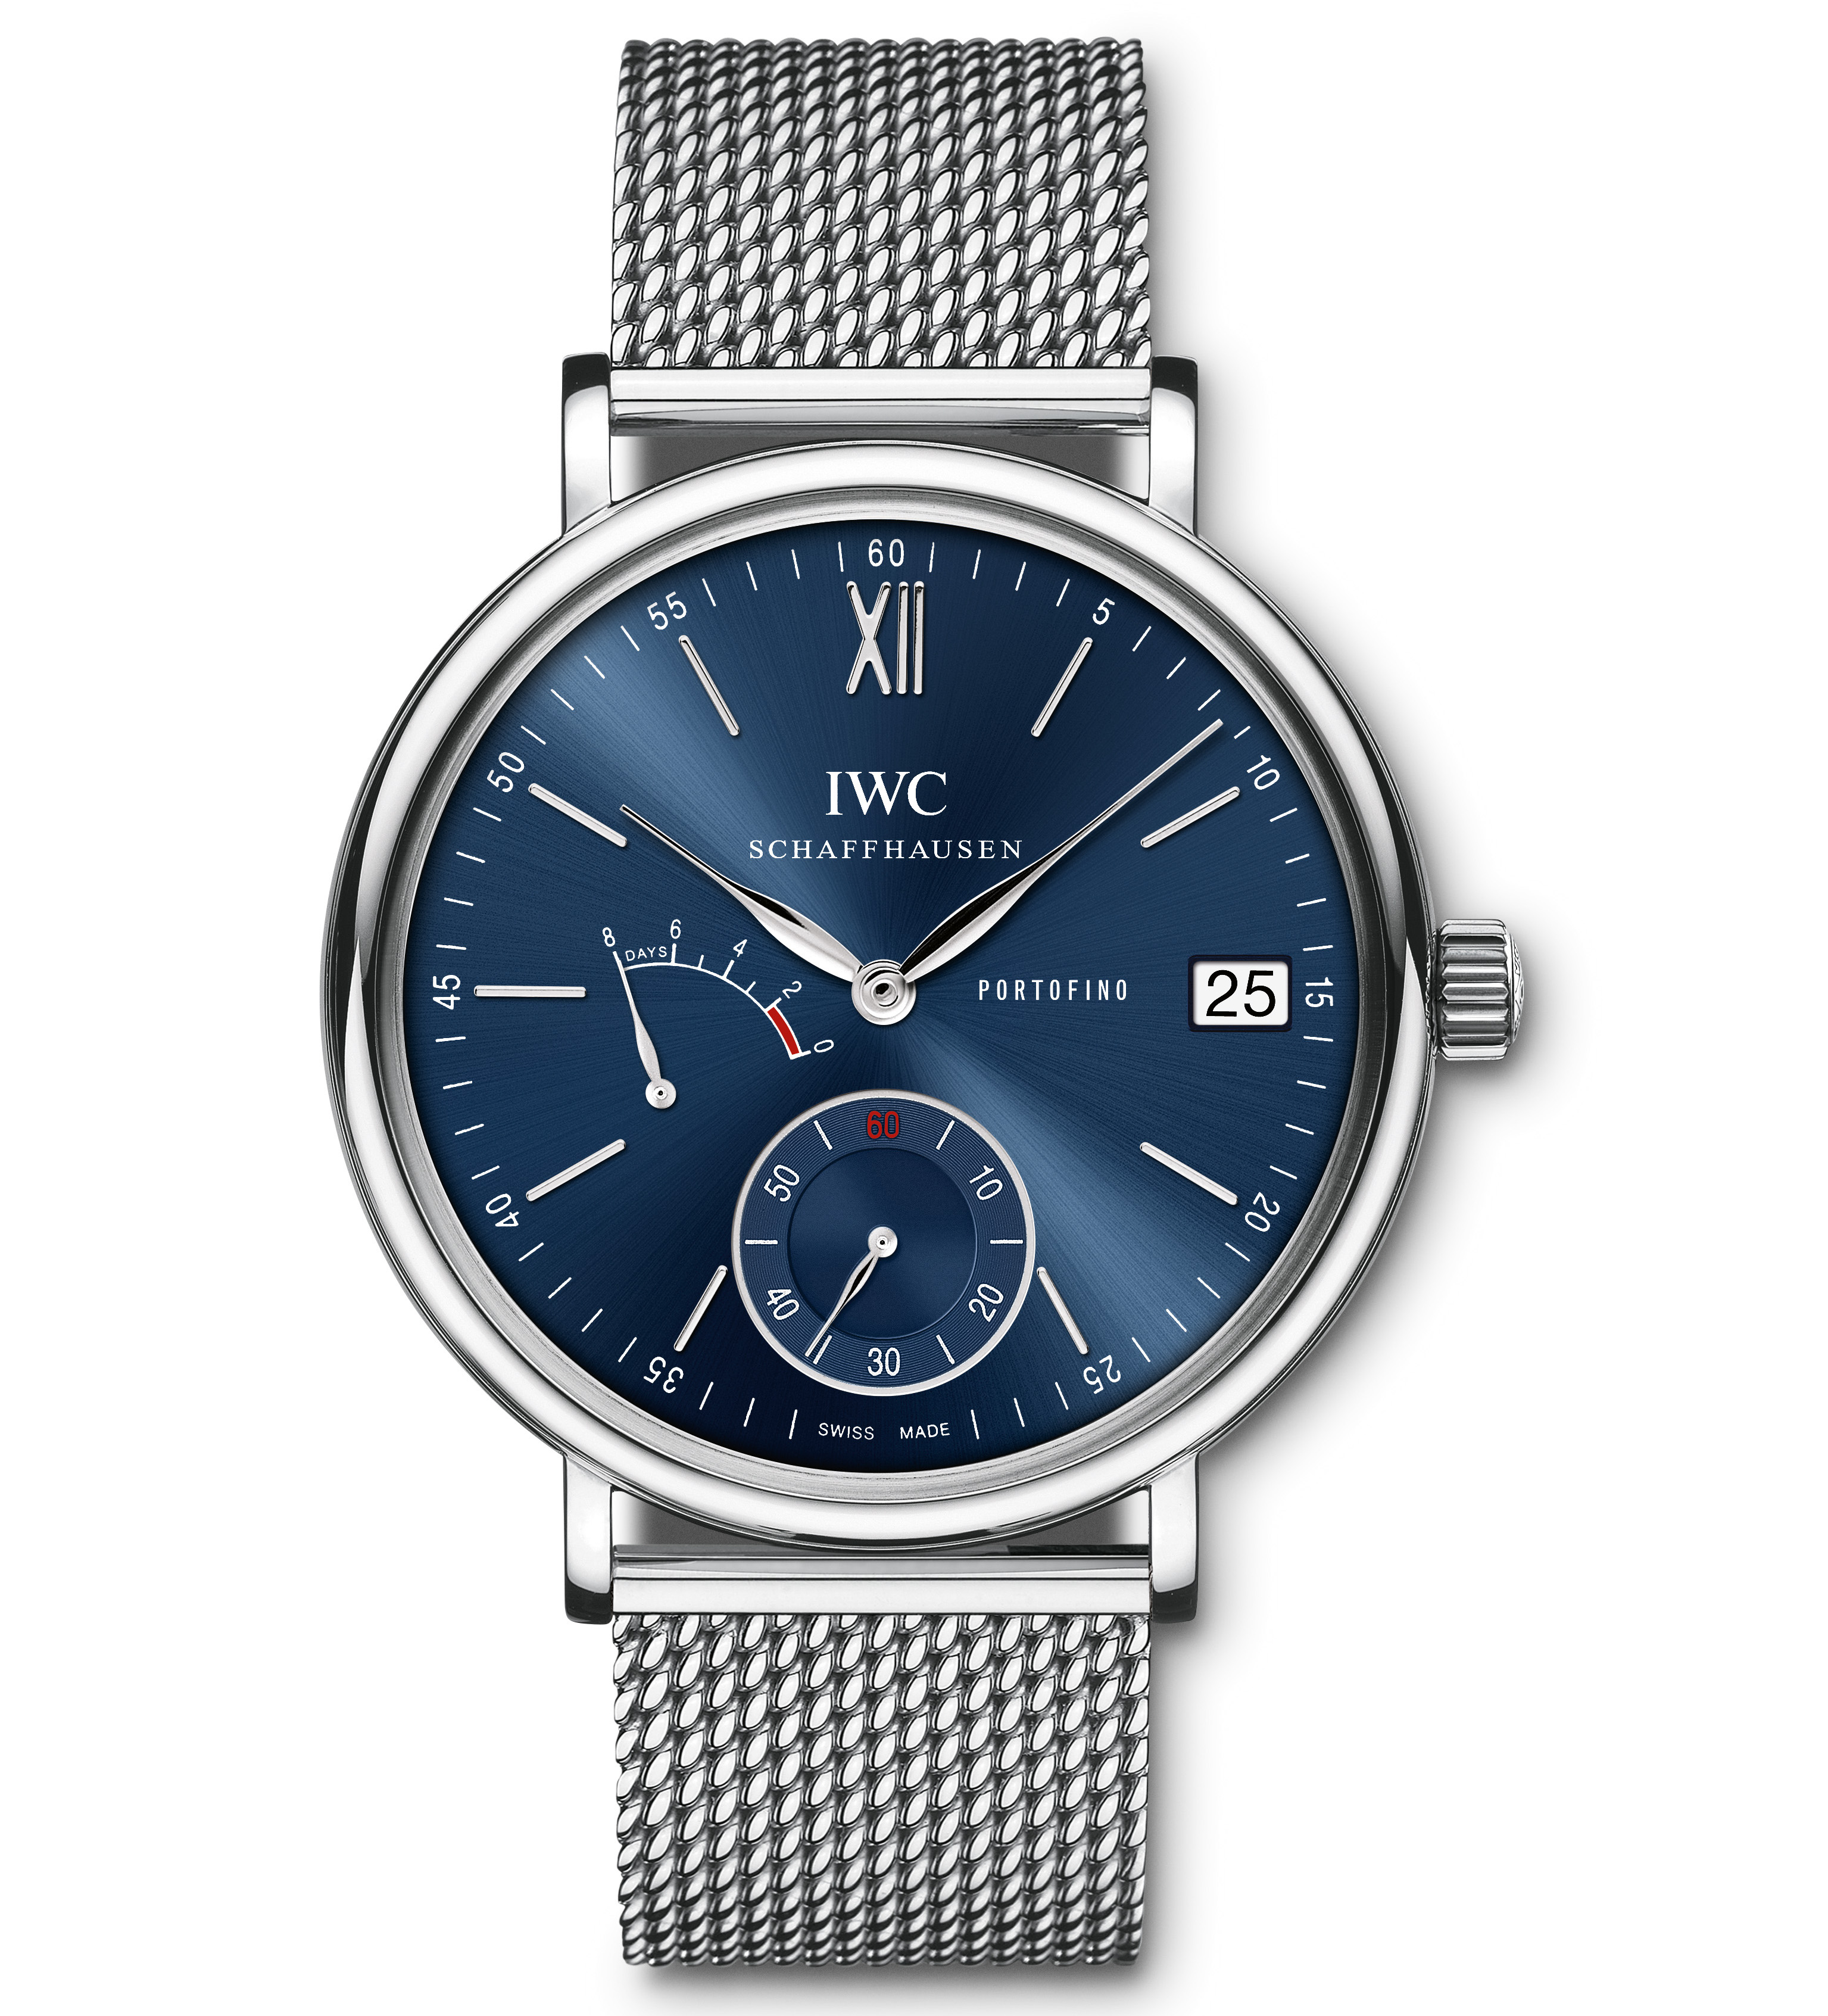 IWC Expands The Portofino Line With Two Attractive New Models